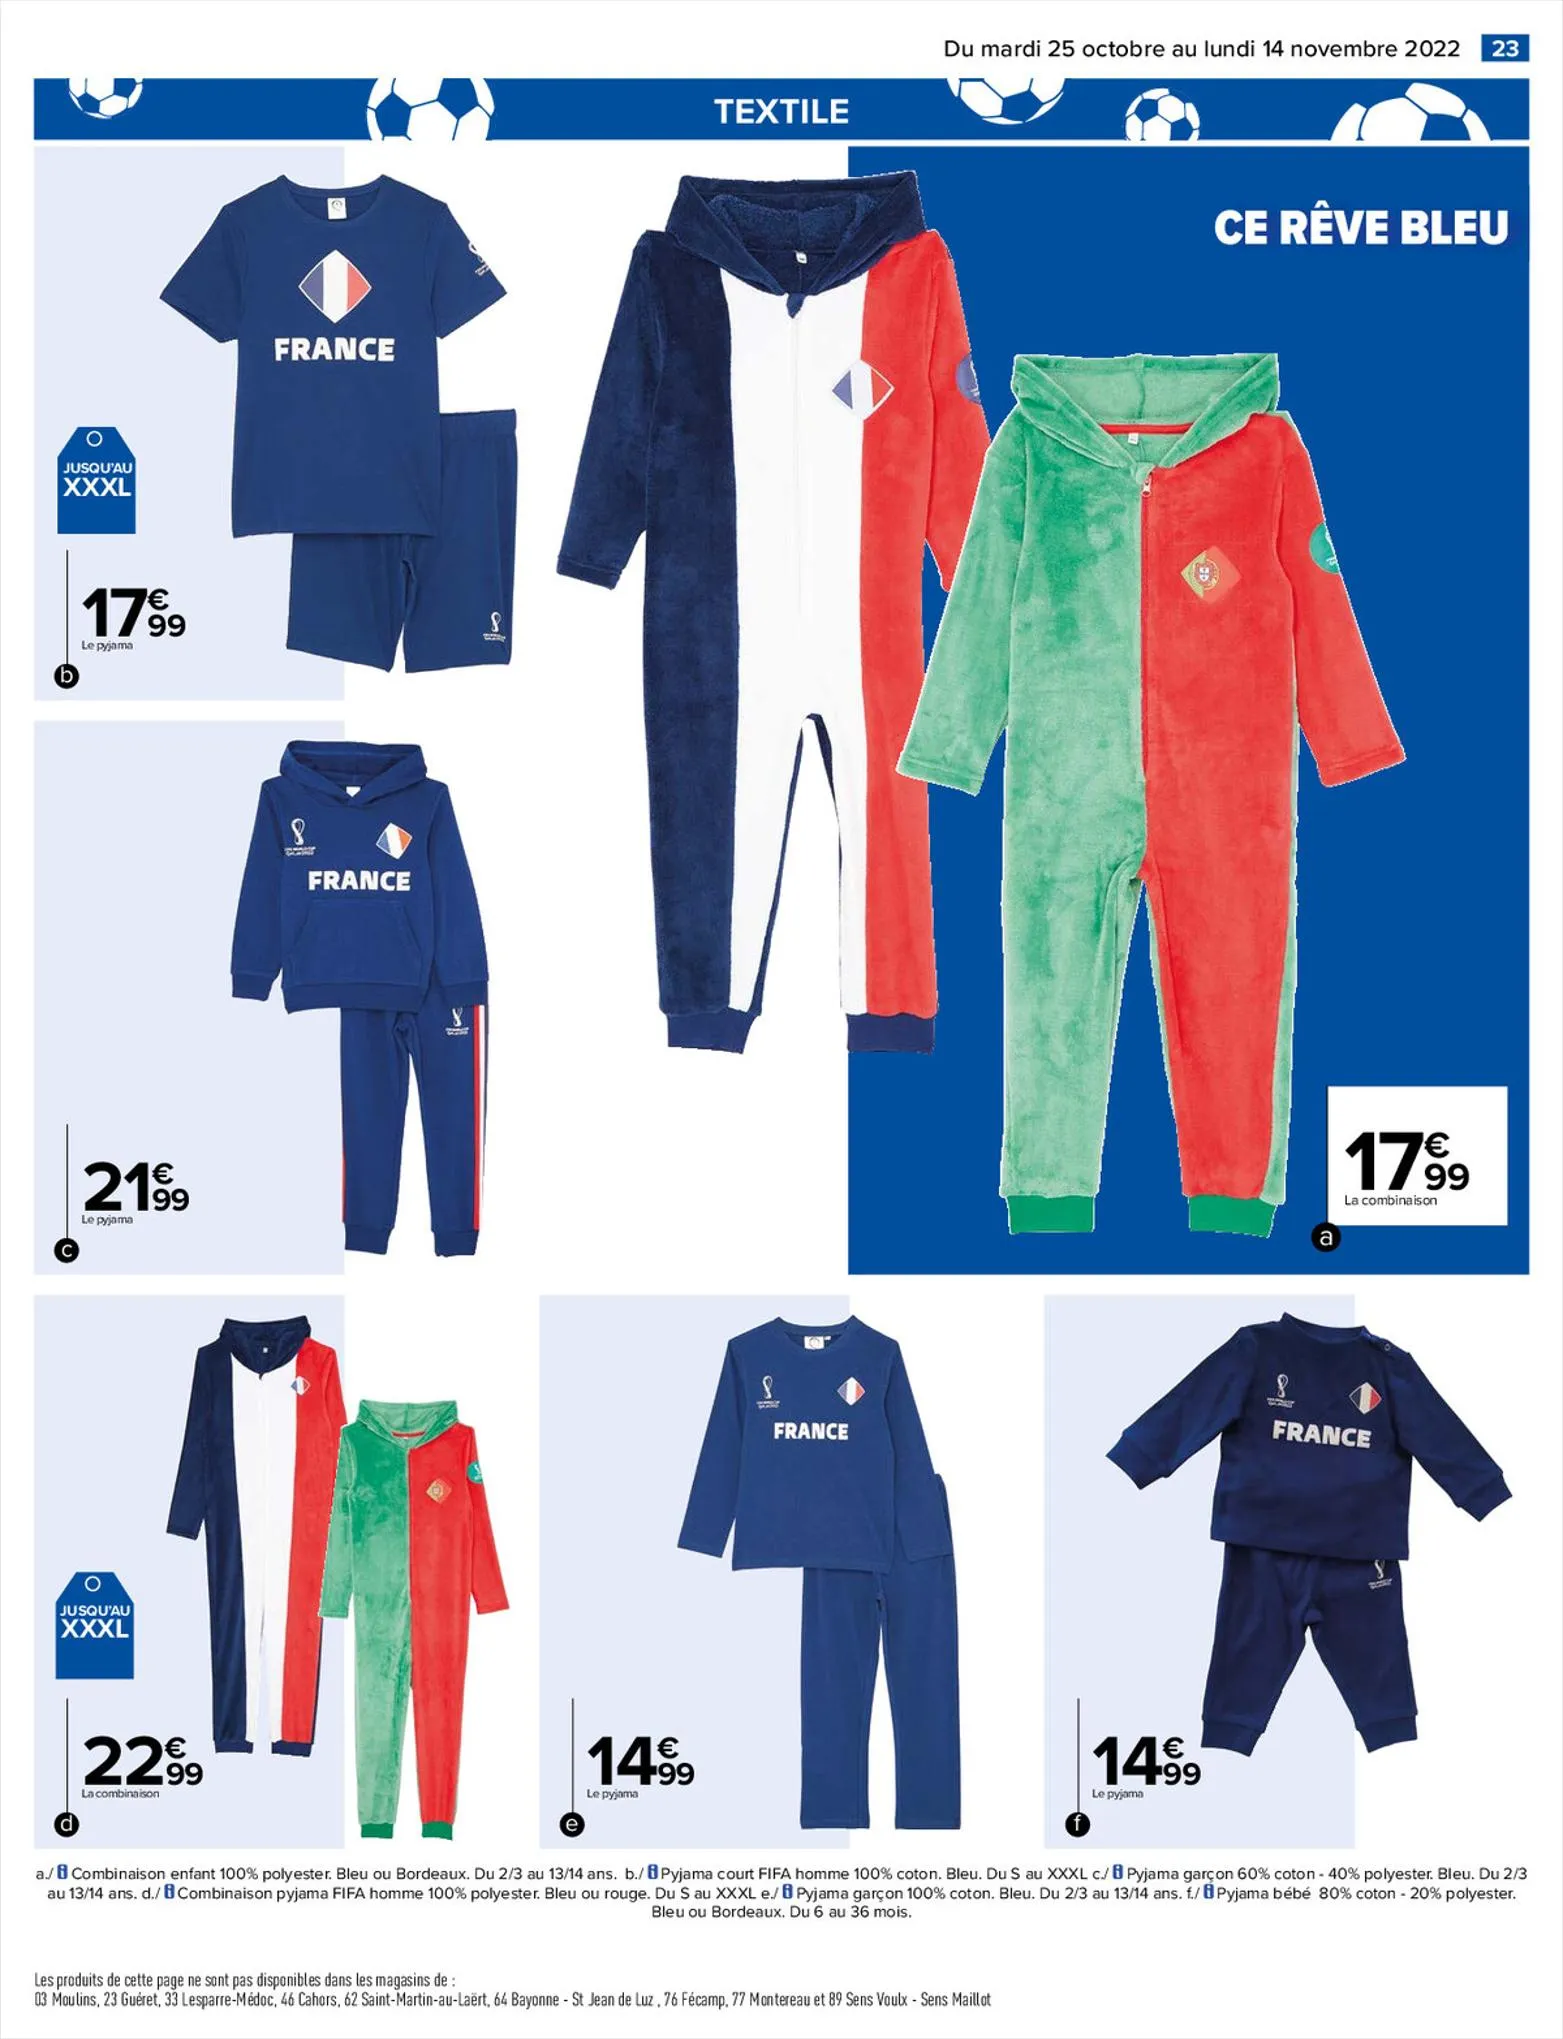 Catalogue Carrefour supporter des supporters, page 00023